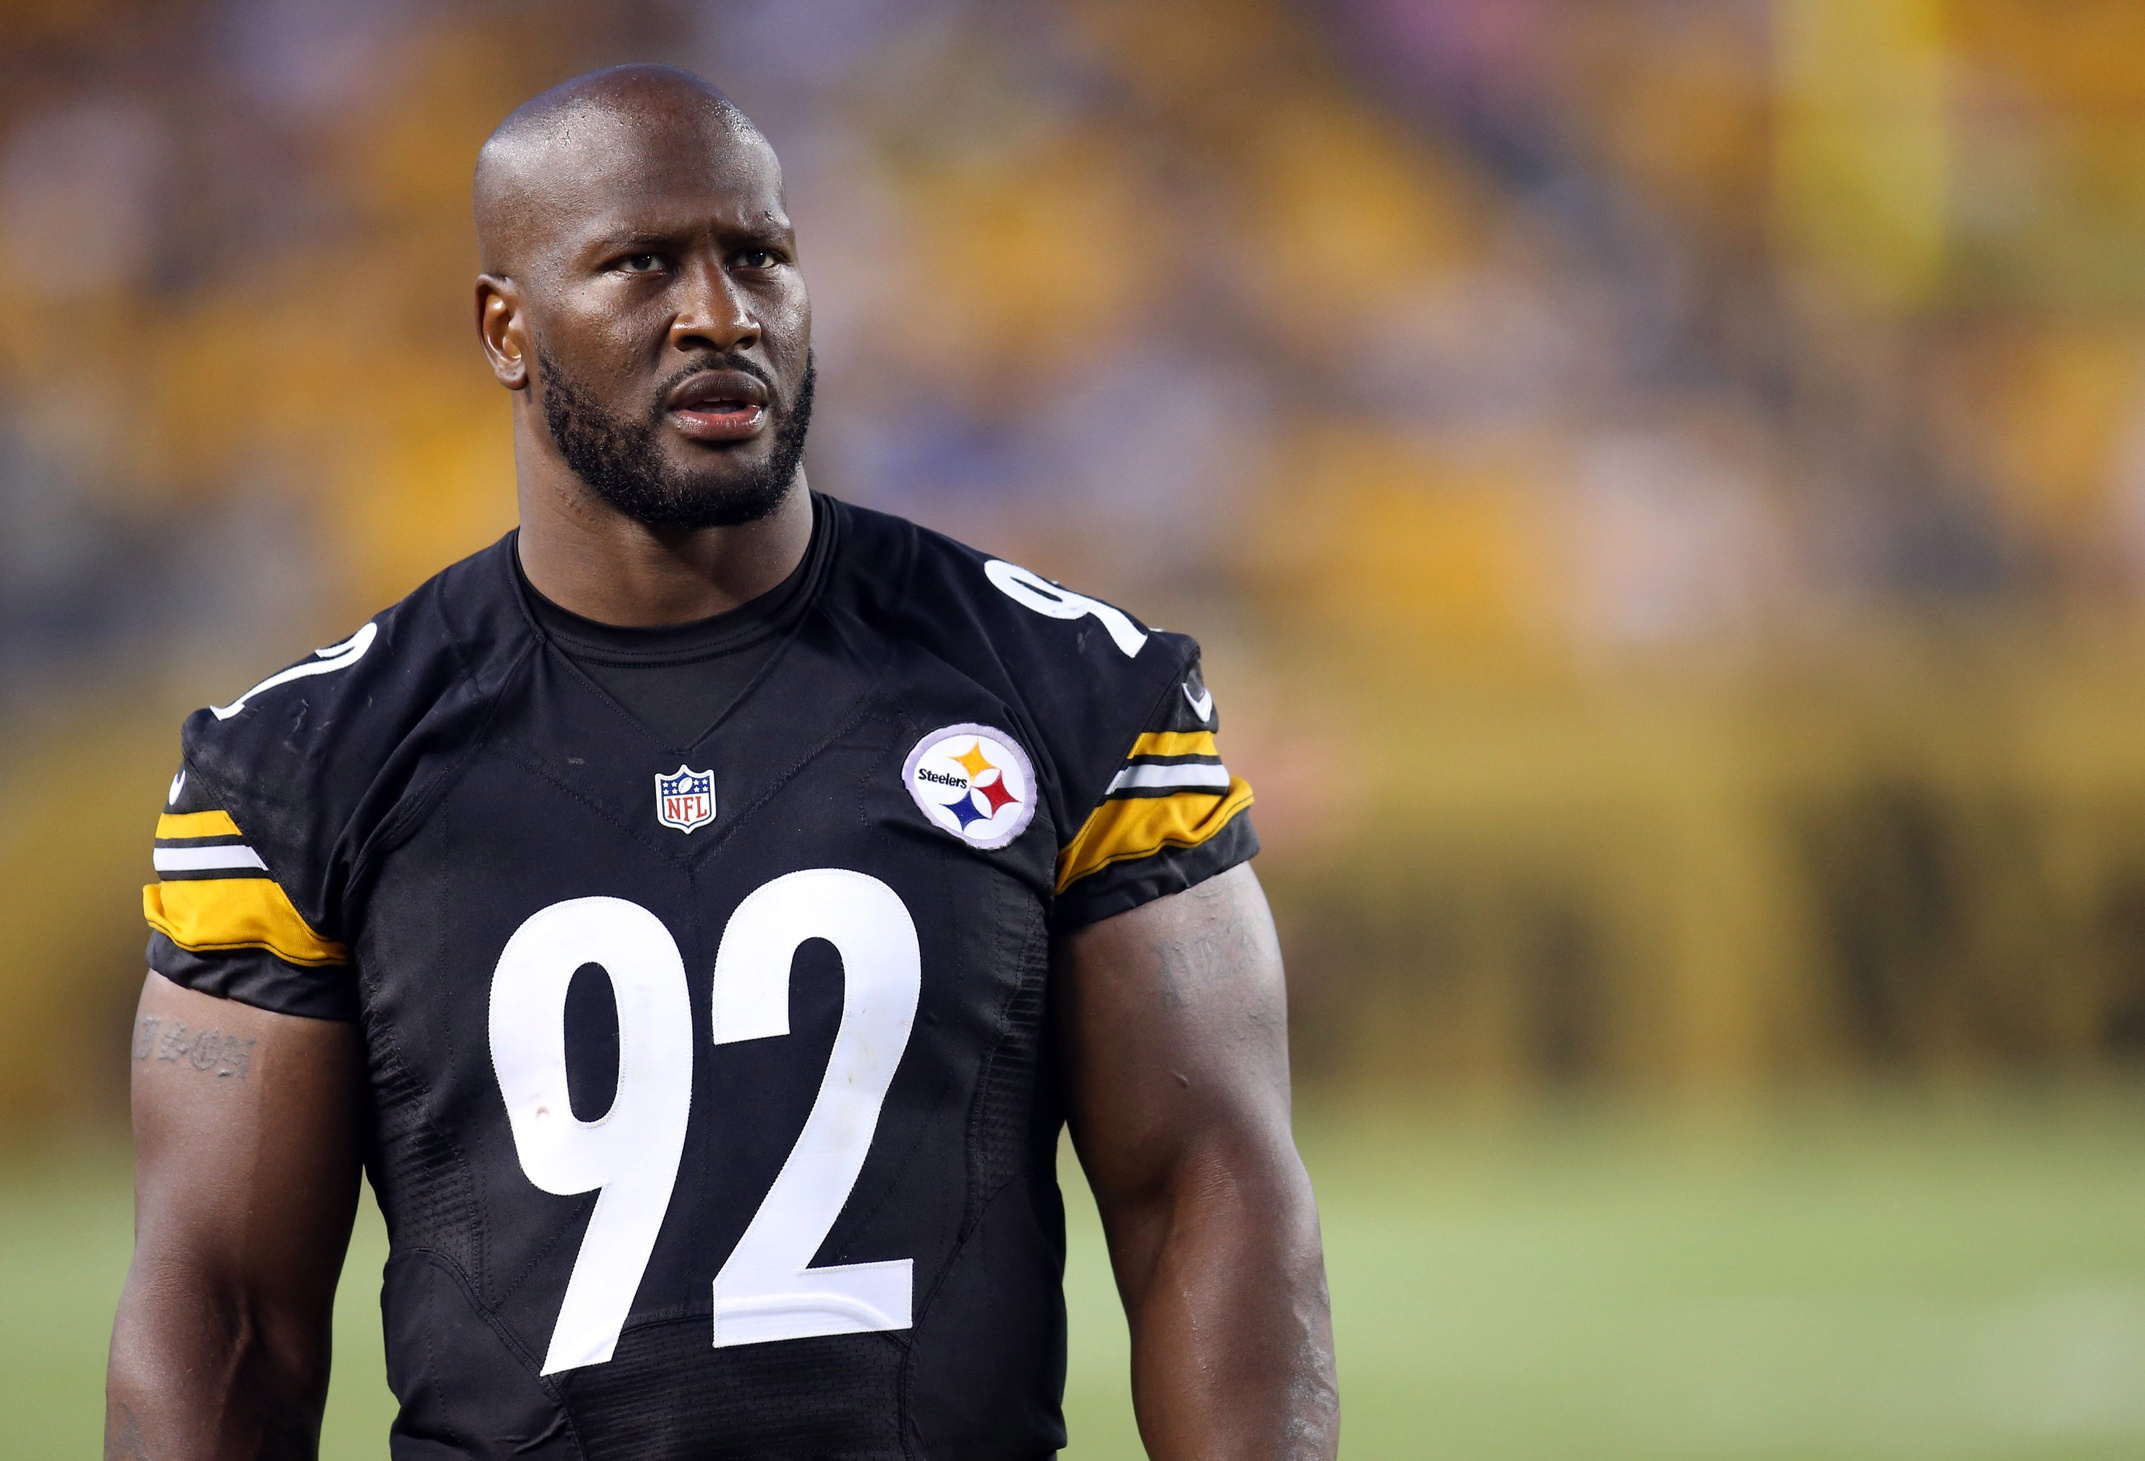 James Harrison spends $300K per year to keep up his body2145 x 1461